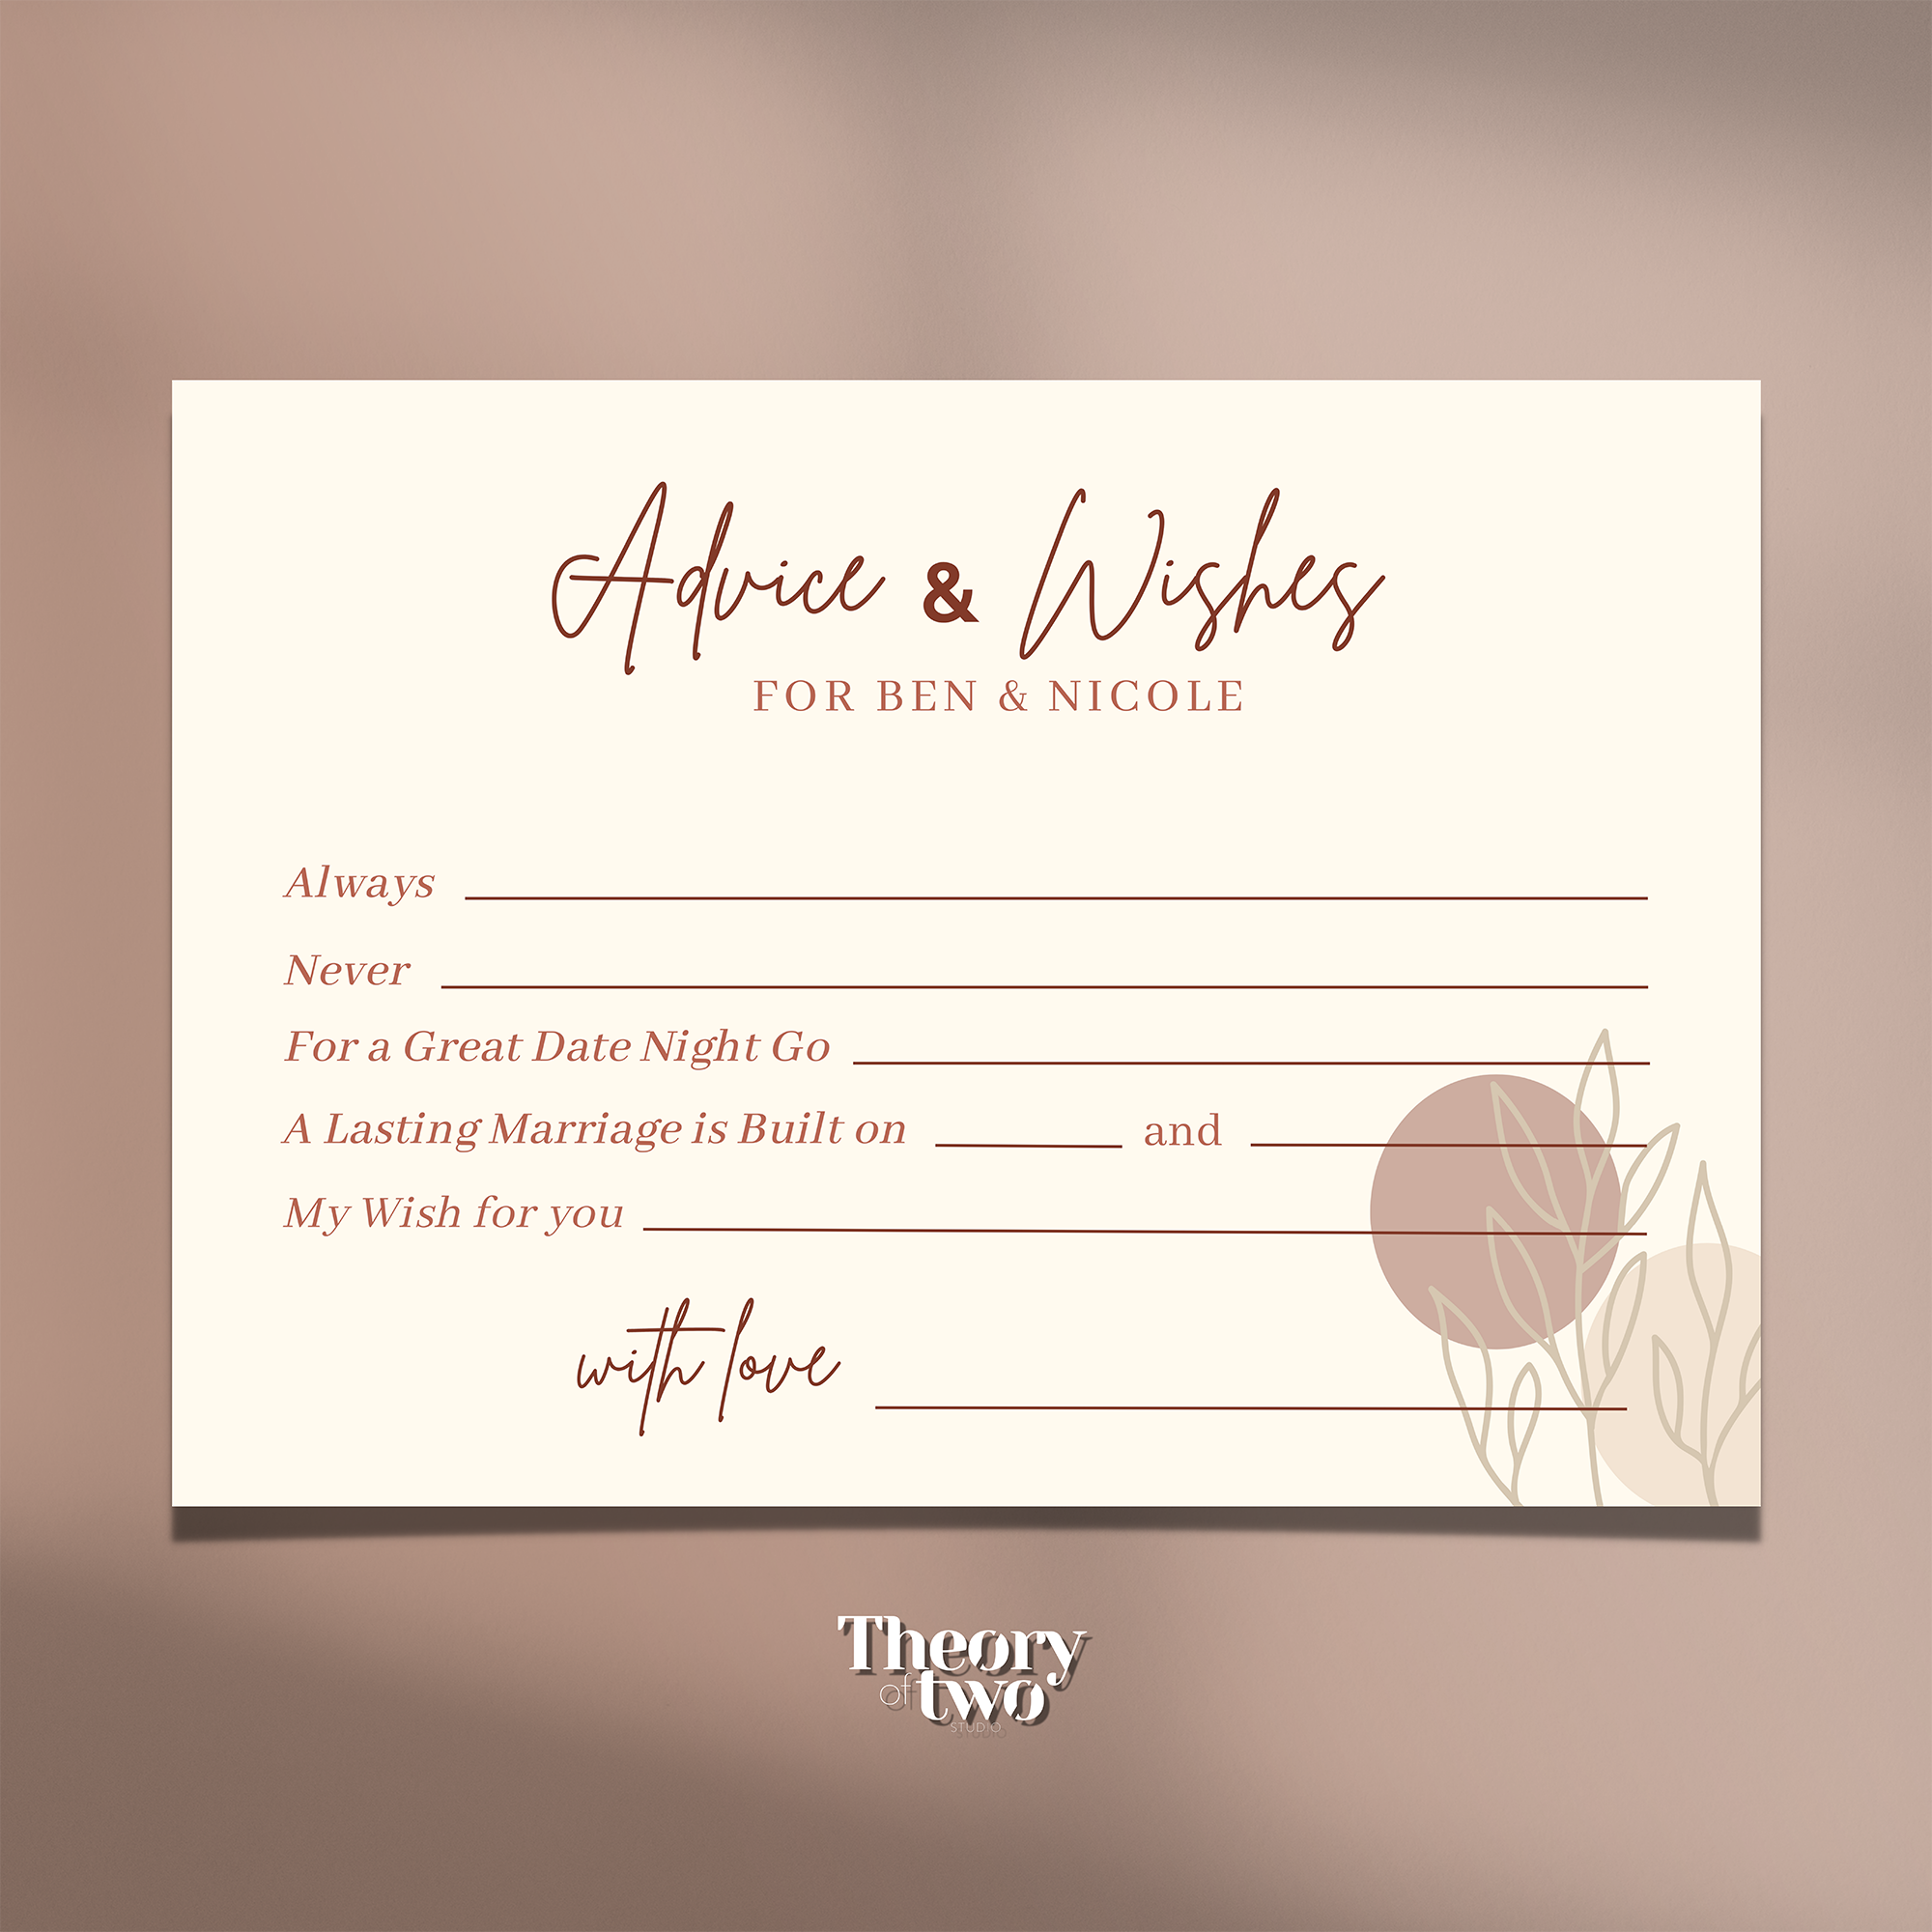 TERRACOTTA OLIVE WEDDING ADVICE CARDS FOR THE BRIDE AND GROOM | Singapore Wedding Card